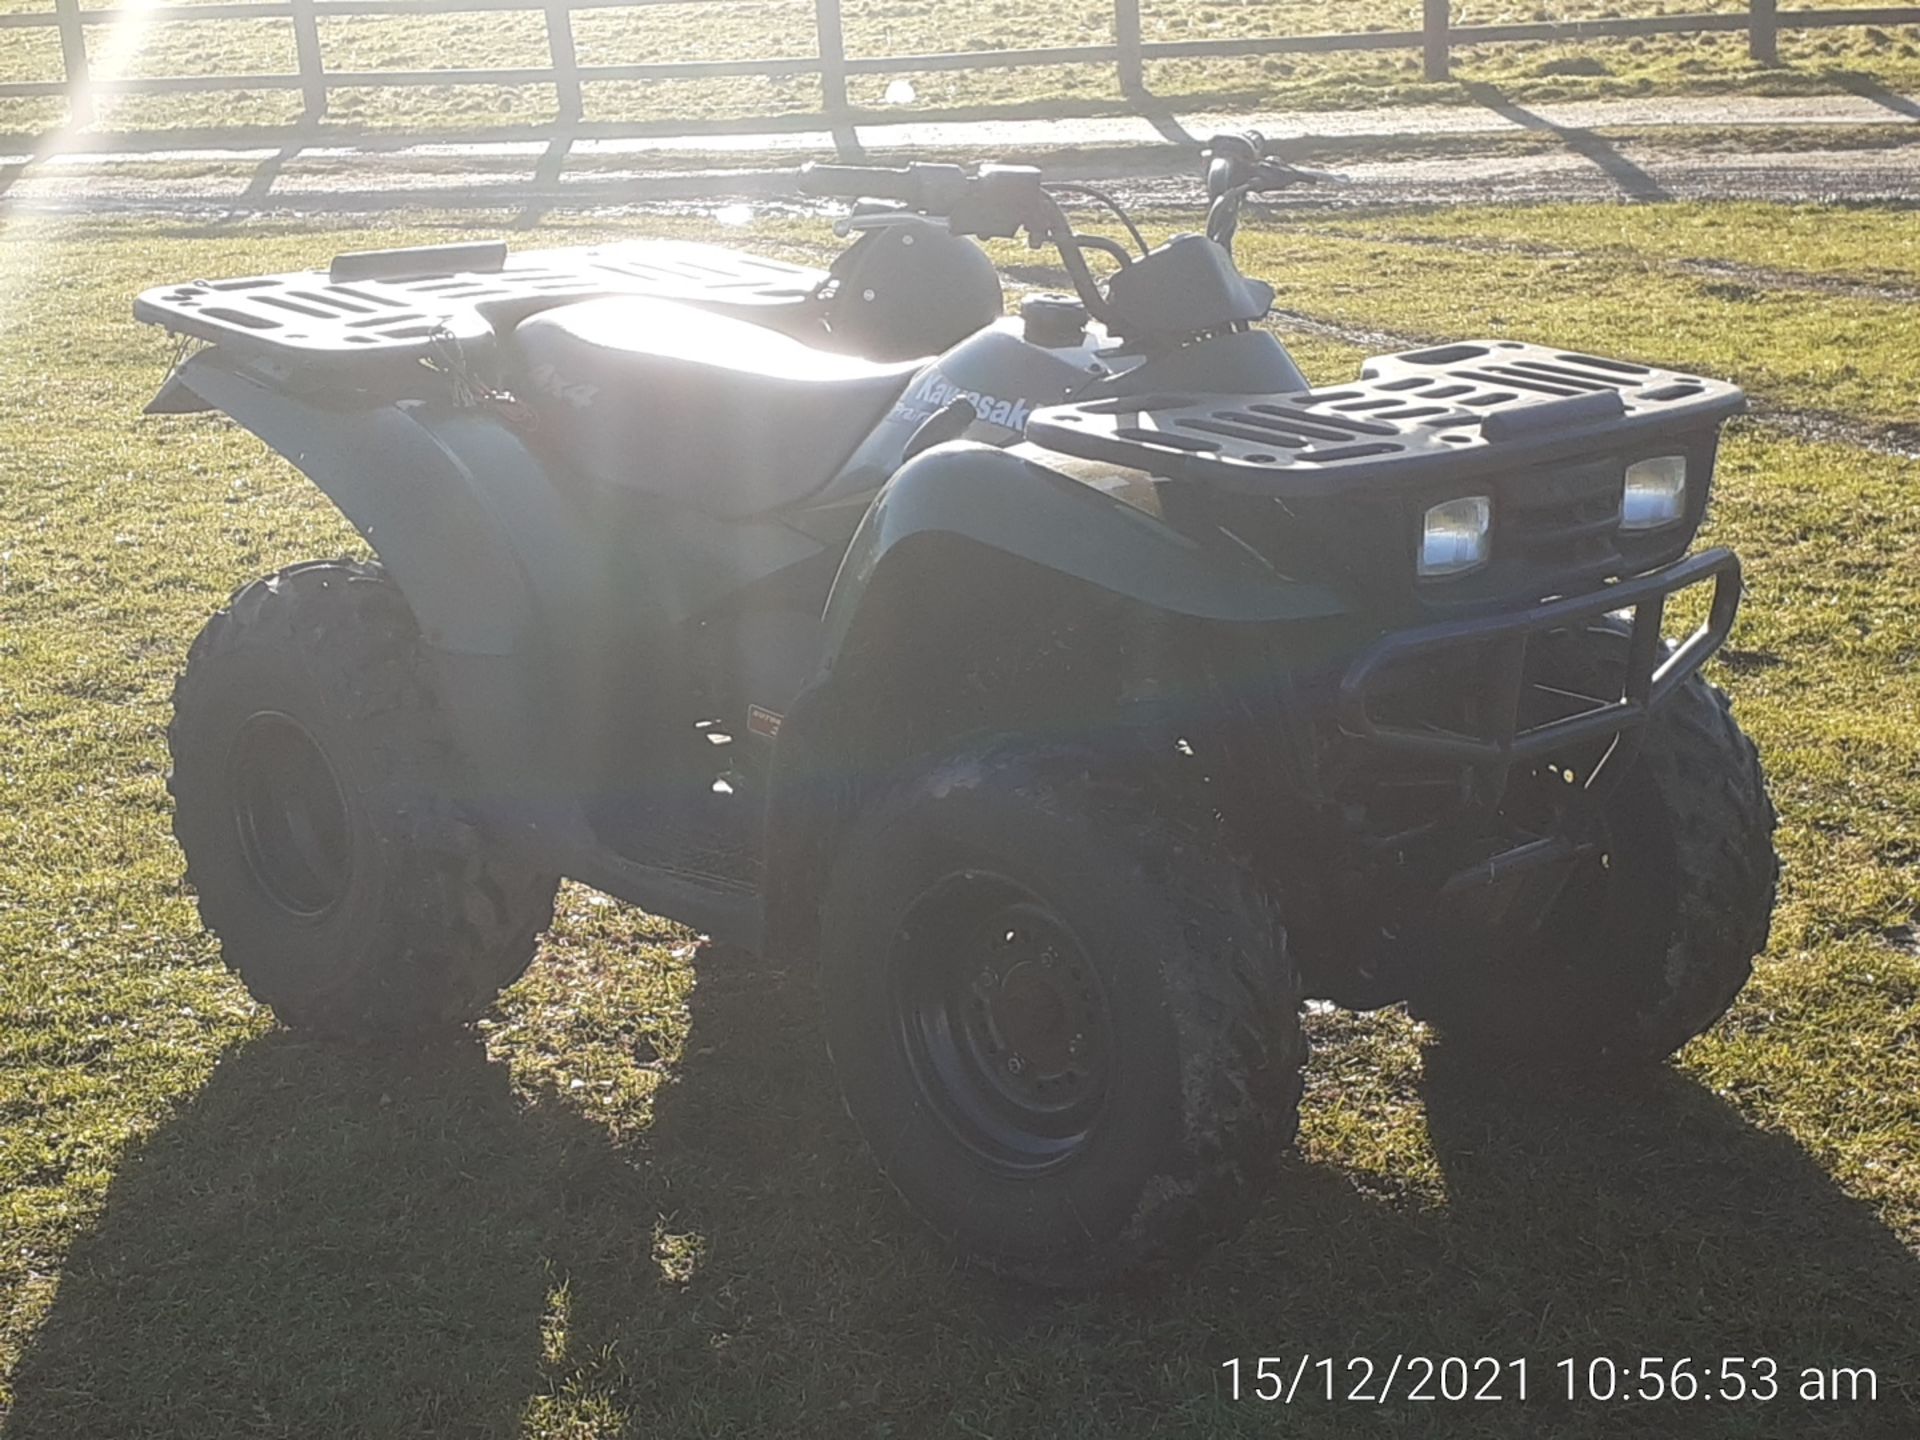 KAWASAKI PRAIRIE 300 4x4 QUAD BIKE, TOW BALL HITCH, FULL TIME 4WD, 1 OWNER FROM NEW *NO VAT*